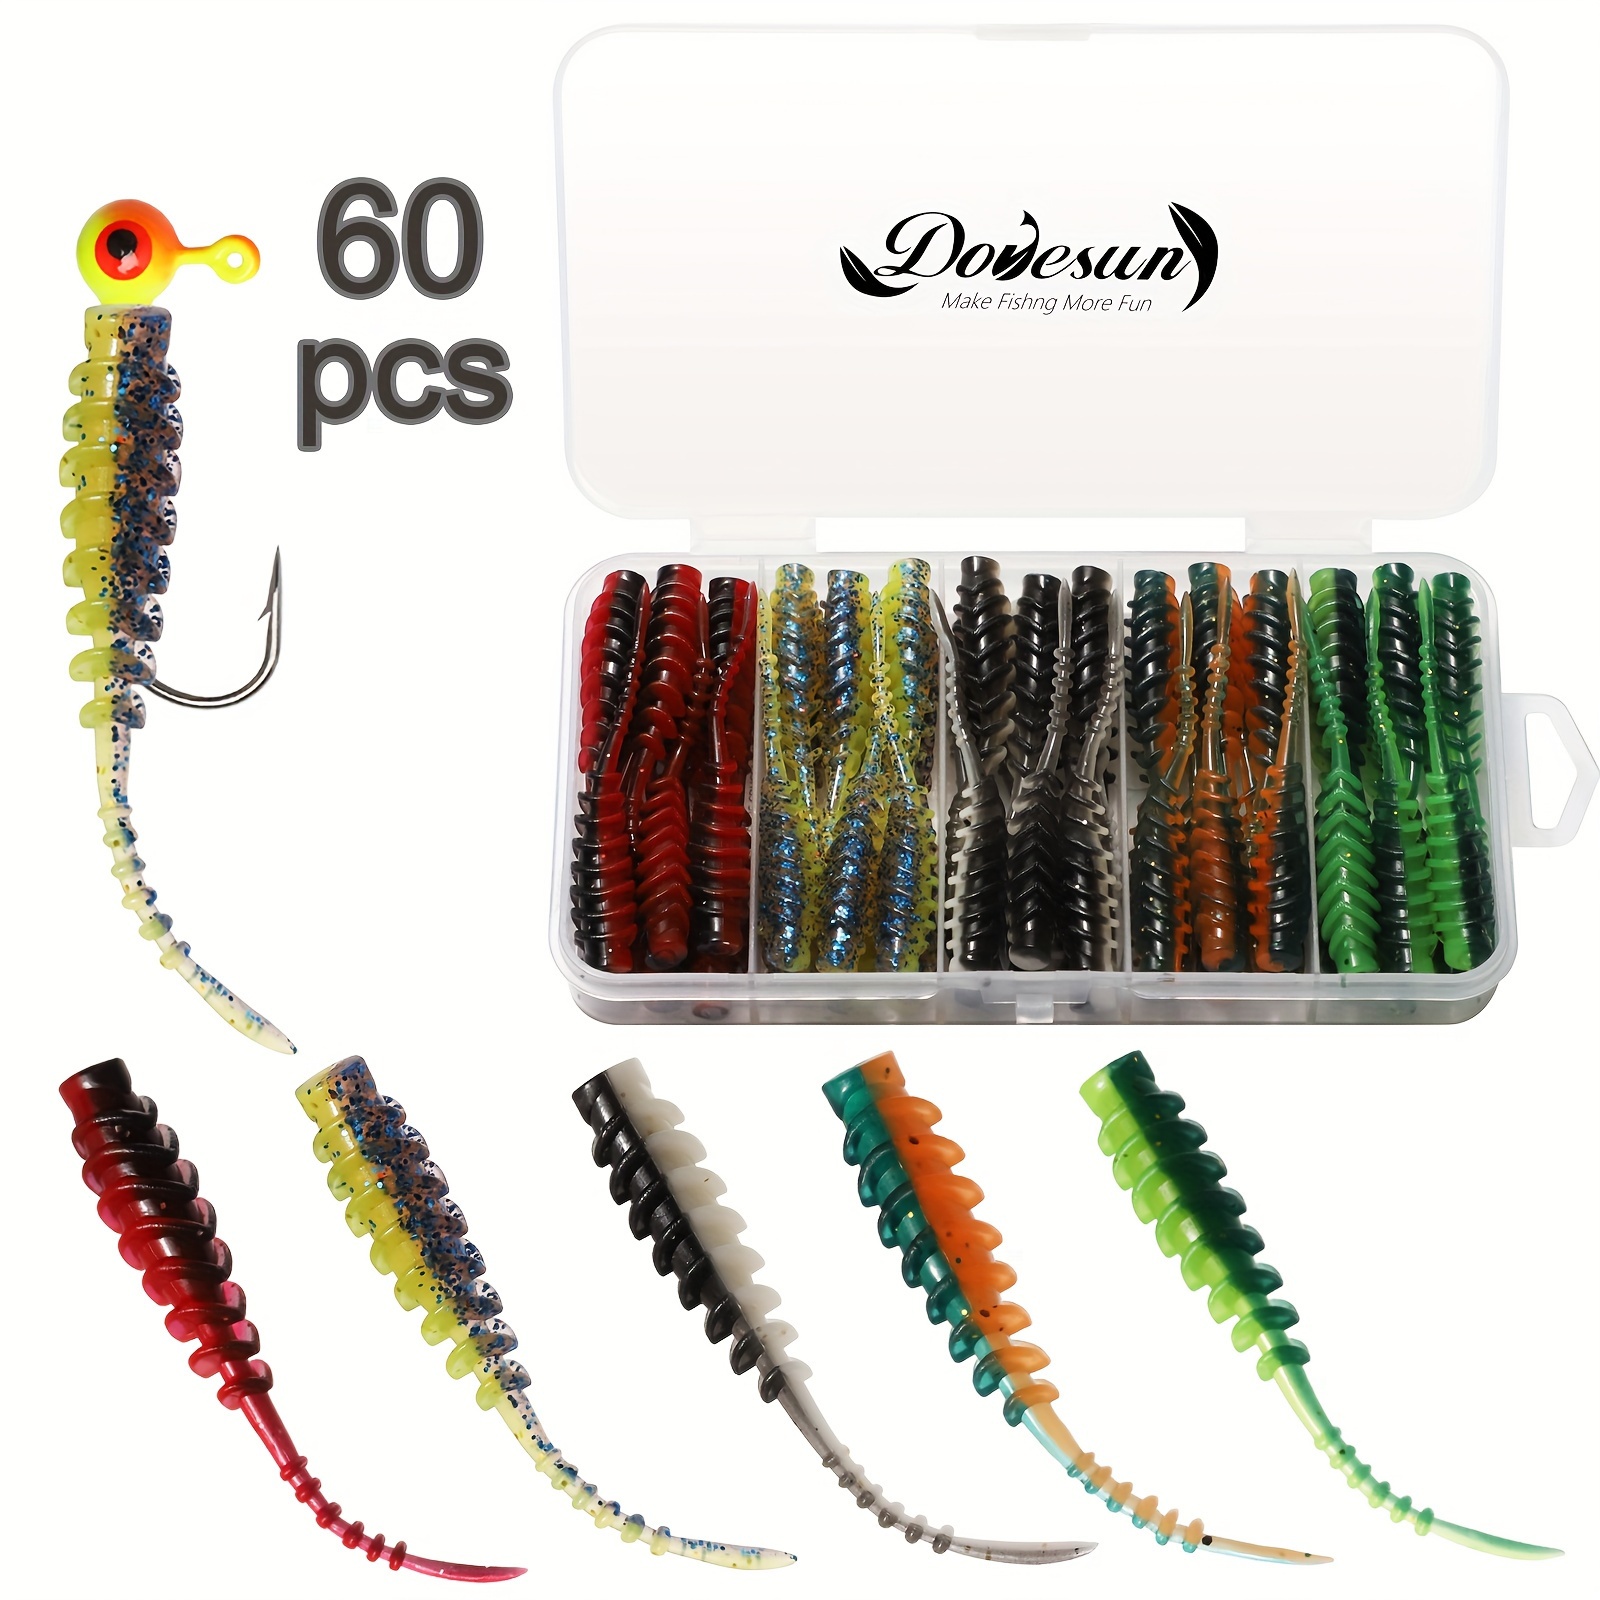 80pcs Earthworm Red Worms Soft Fishing Lure Baits 